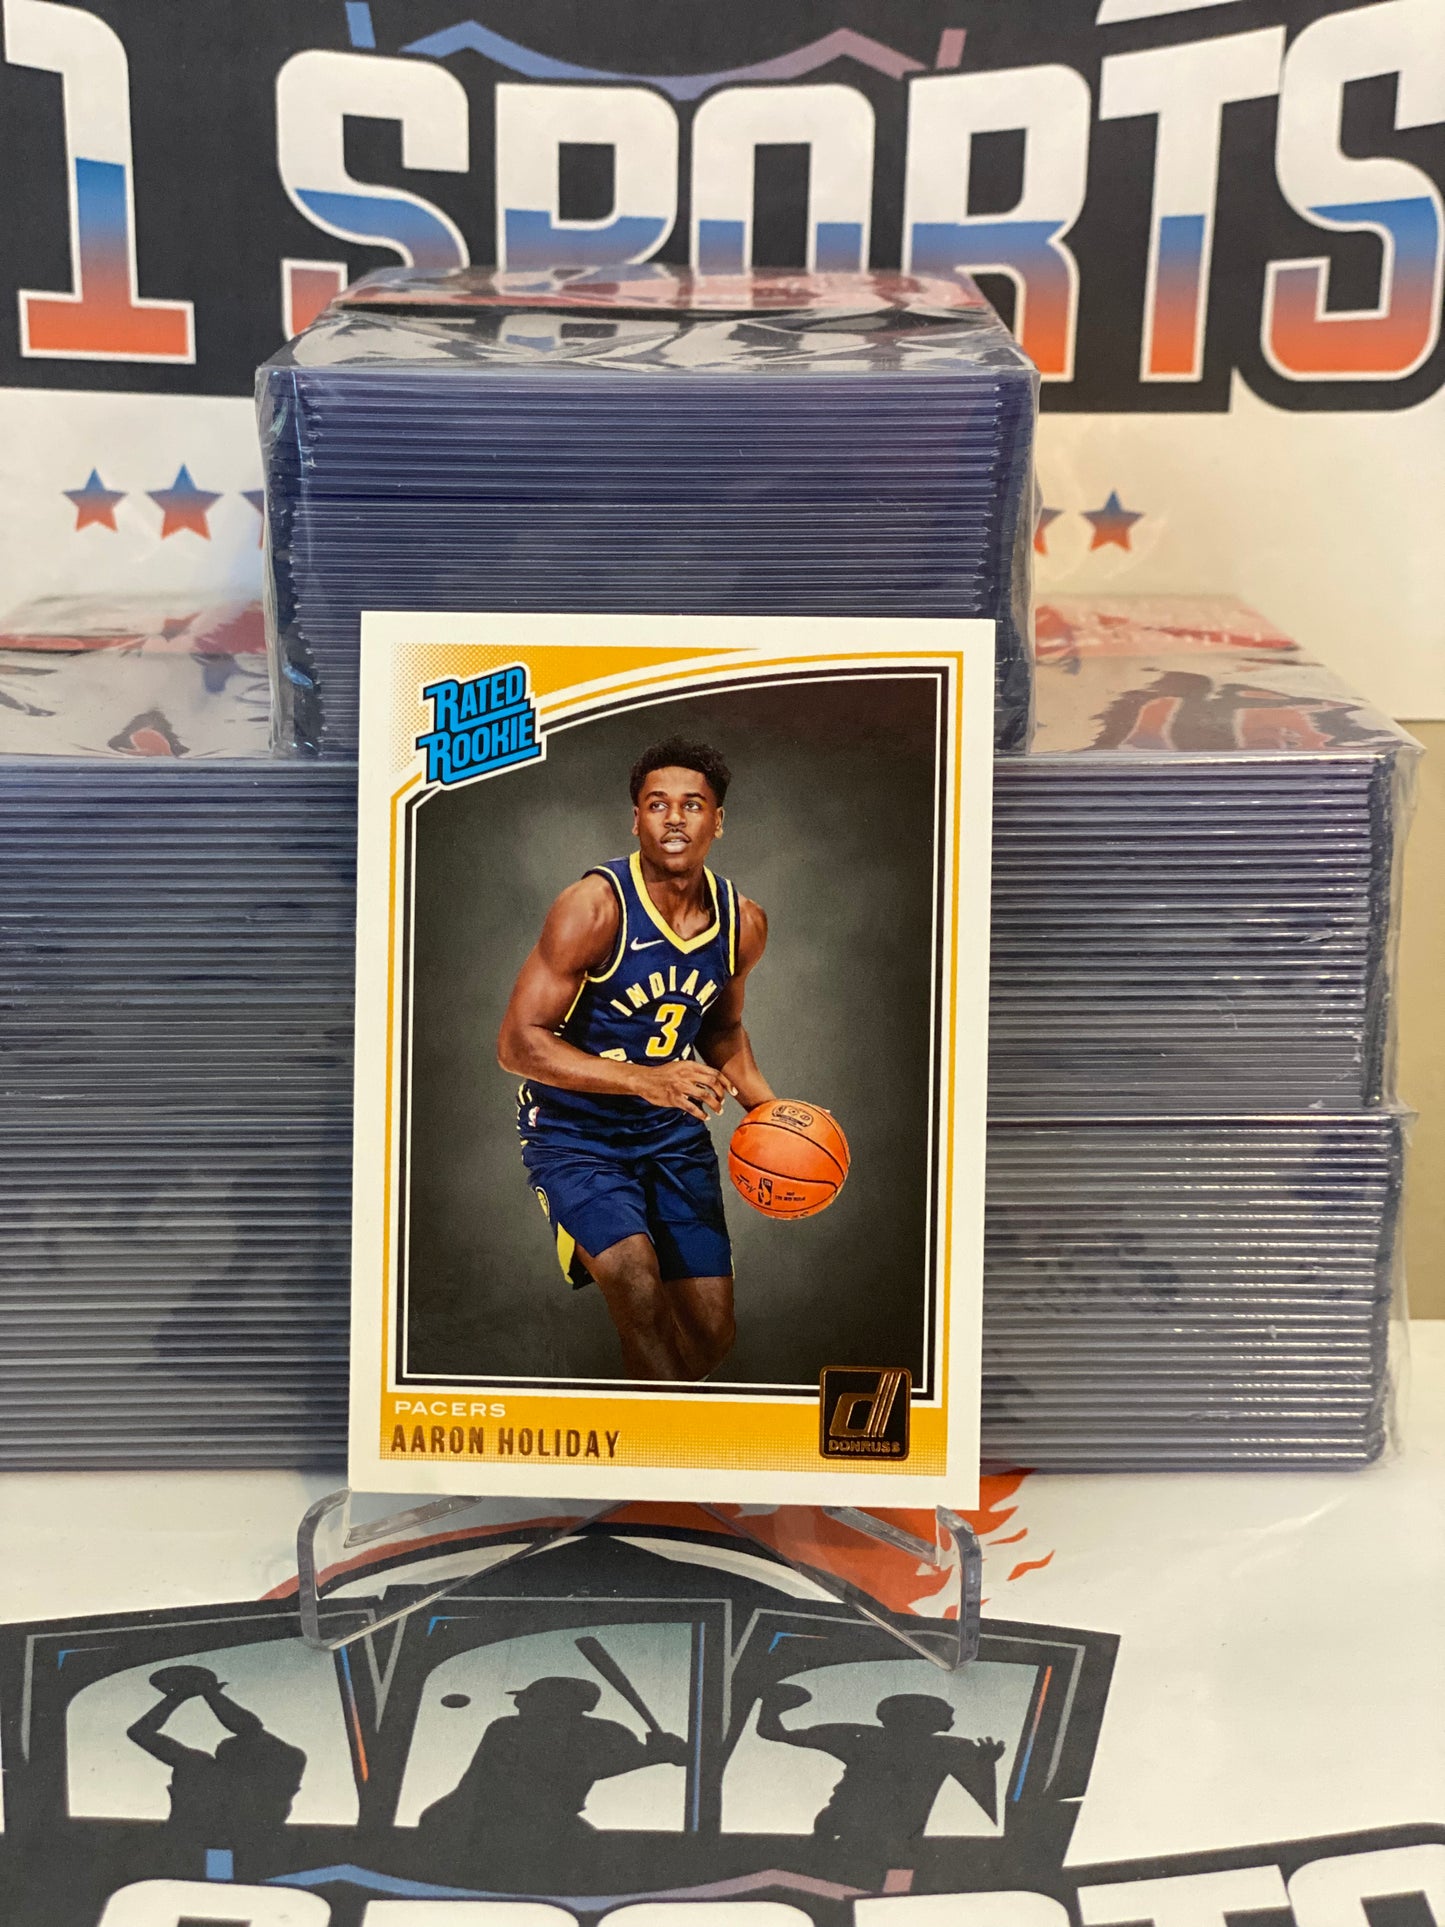 2018 Donruss (Rated Rookie) Aaron Holiday #176